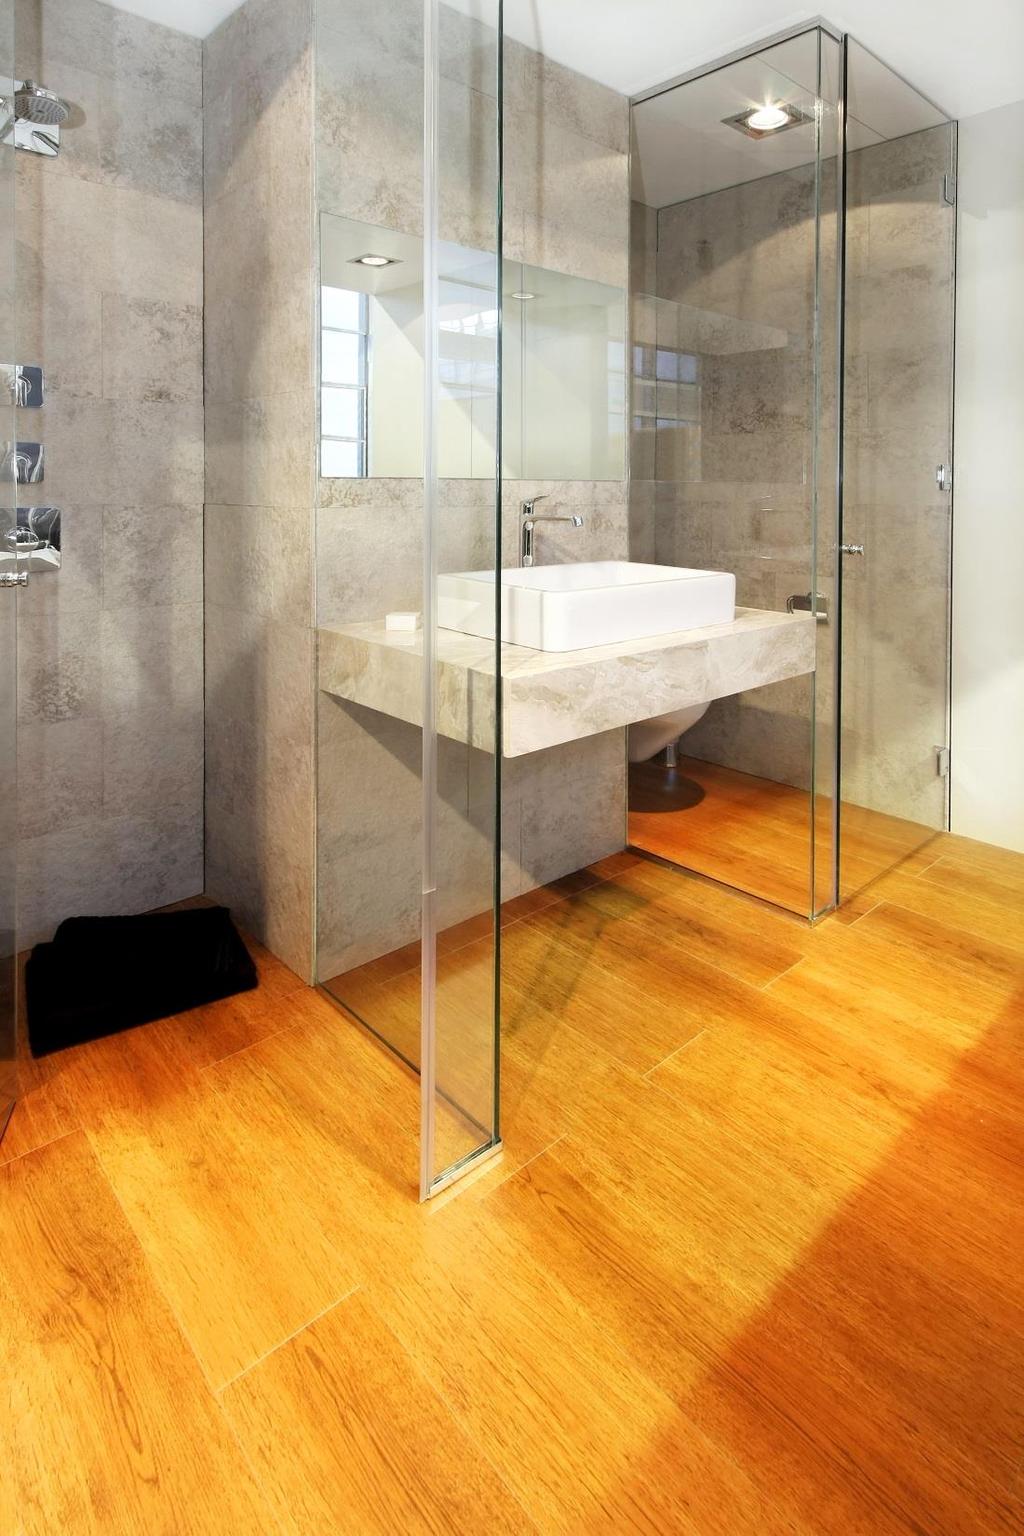 Framed or Frameless? In terms of a shower s exterior, the golden rule is elegance through simplicity.